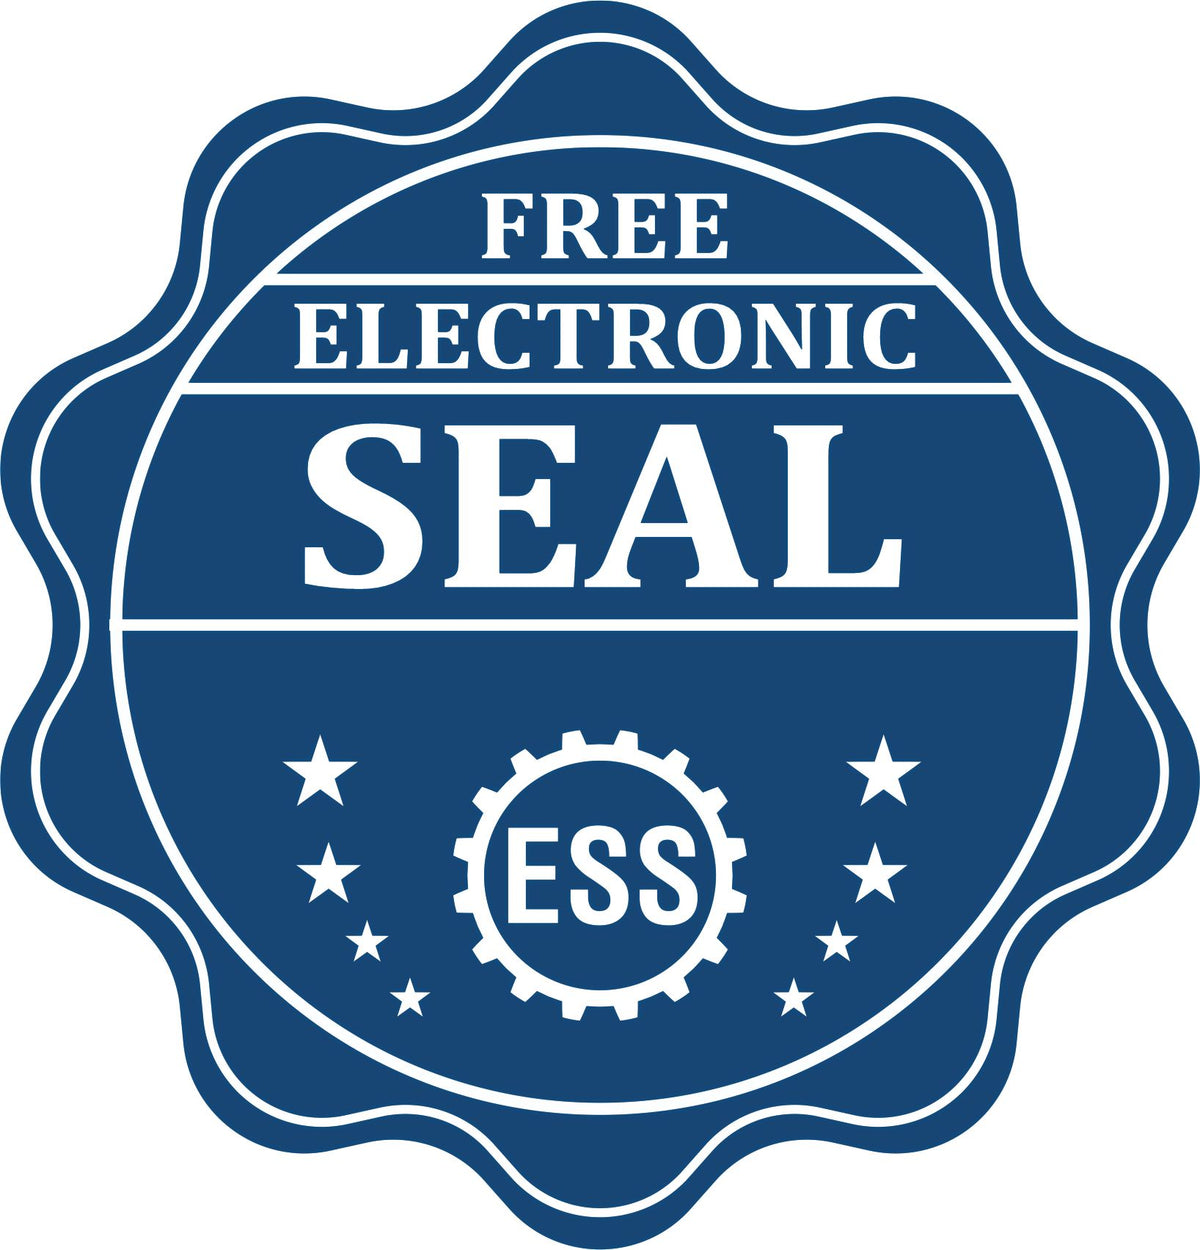 A badge showing a free electronic seal for the Gift Louisiana Engineer Seal with stars and the ESS gear on the emblem.